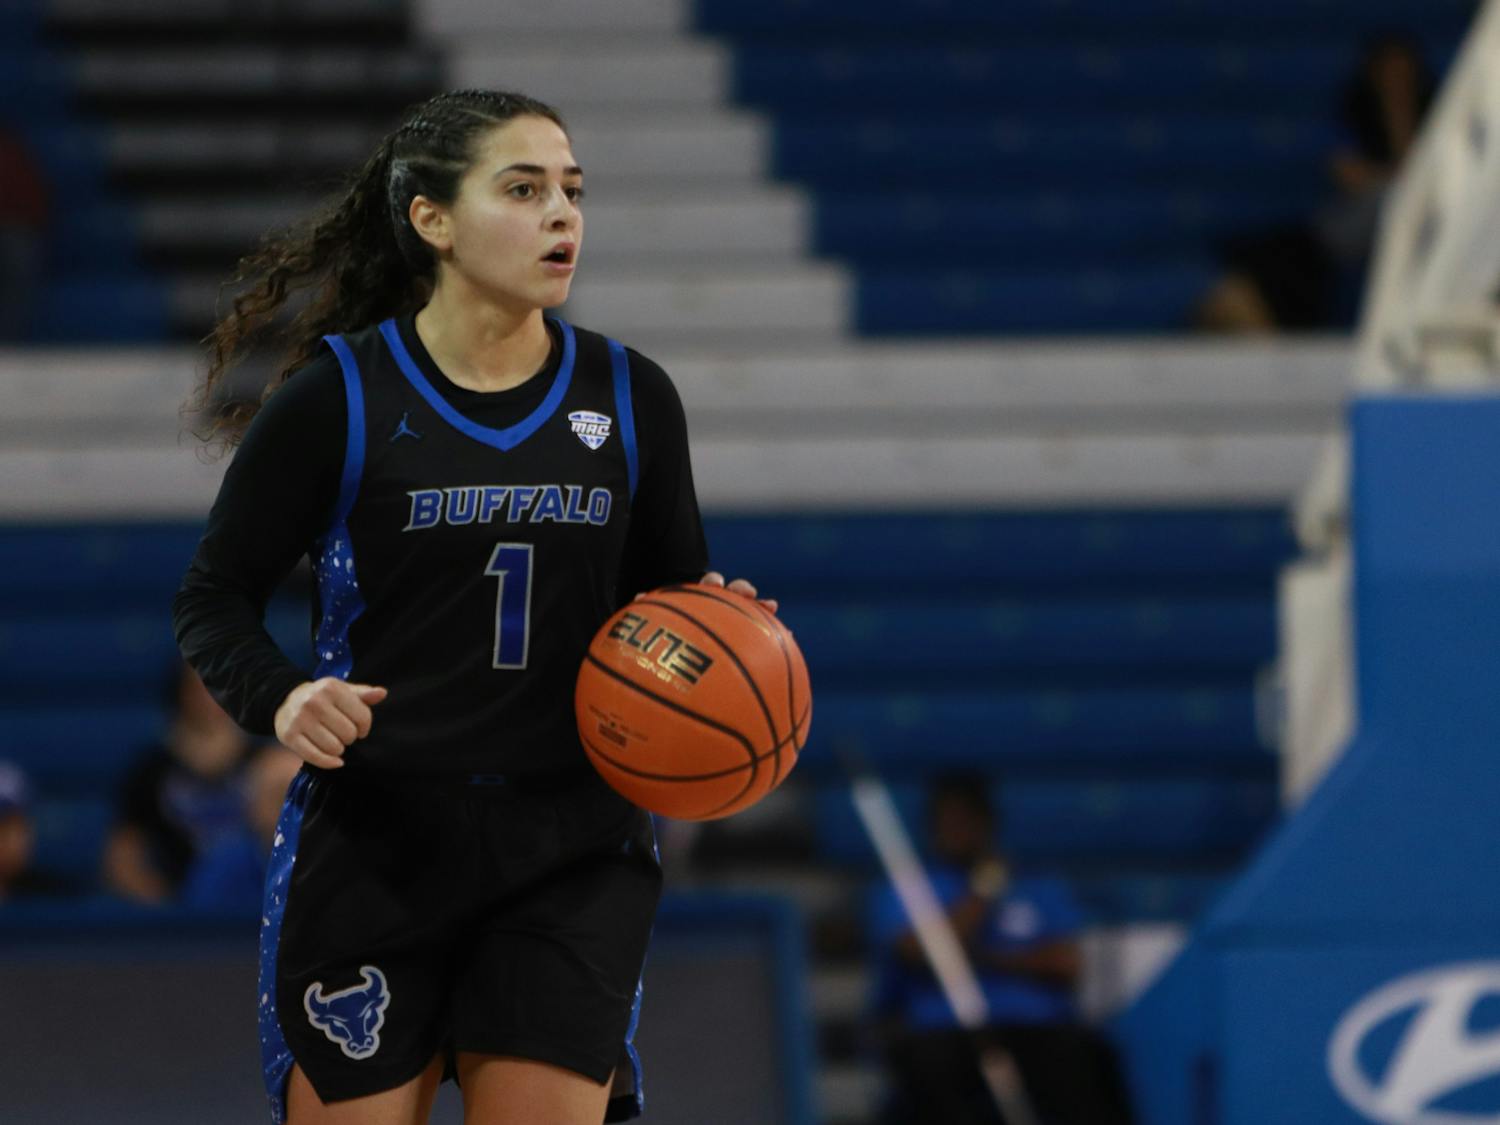 The Bulls led 16-10 at the end of the first quarter after senior guard Rana Elhusseini hit a three-pointer.&nbsp;